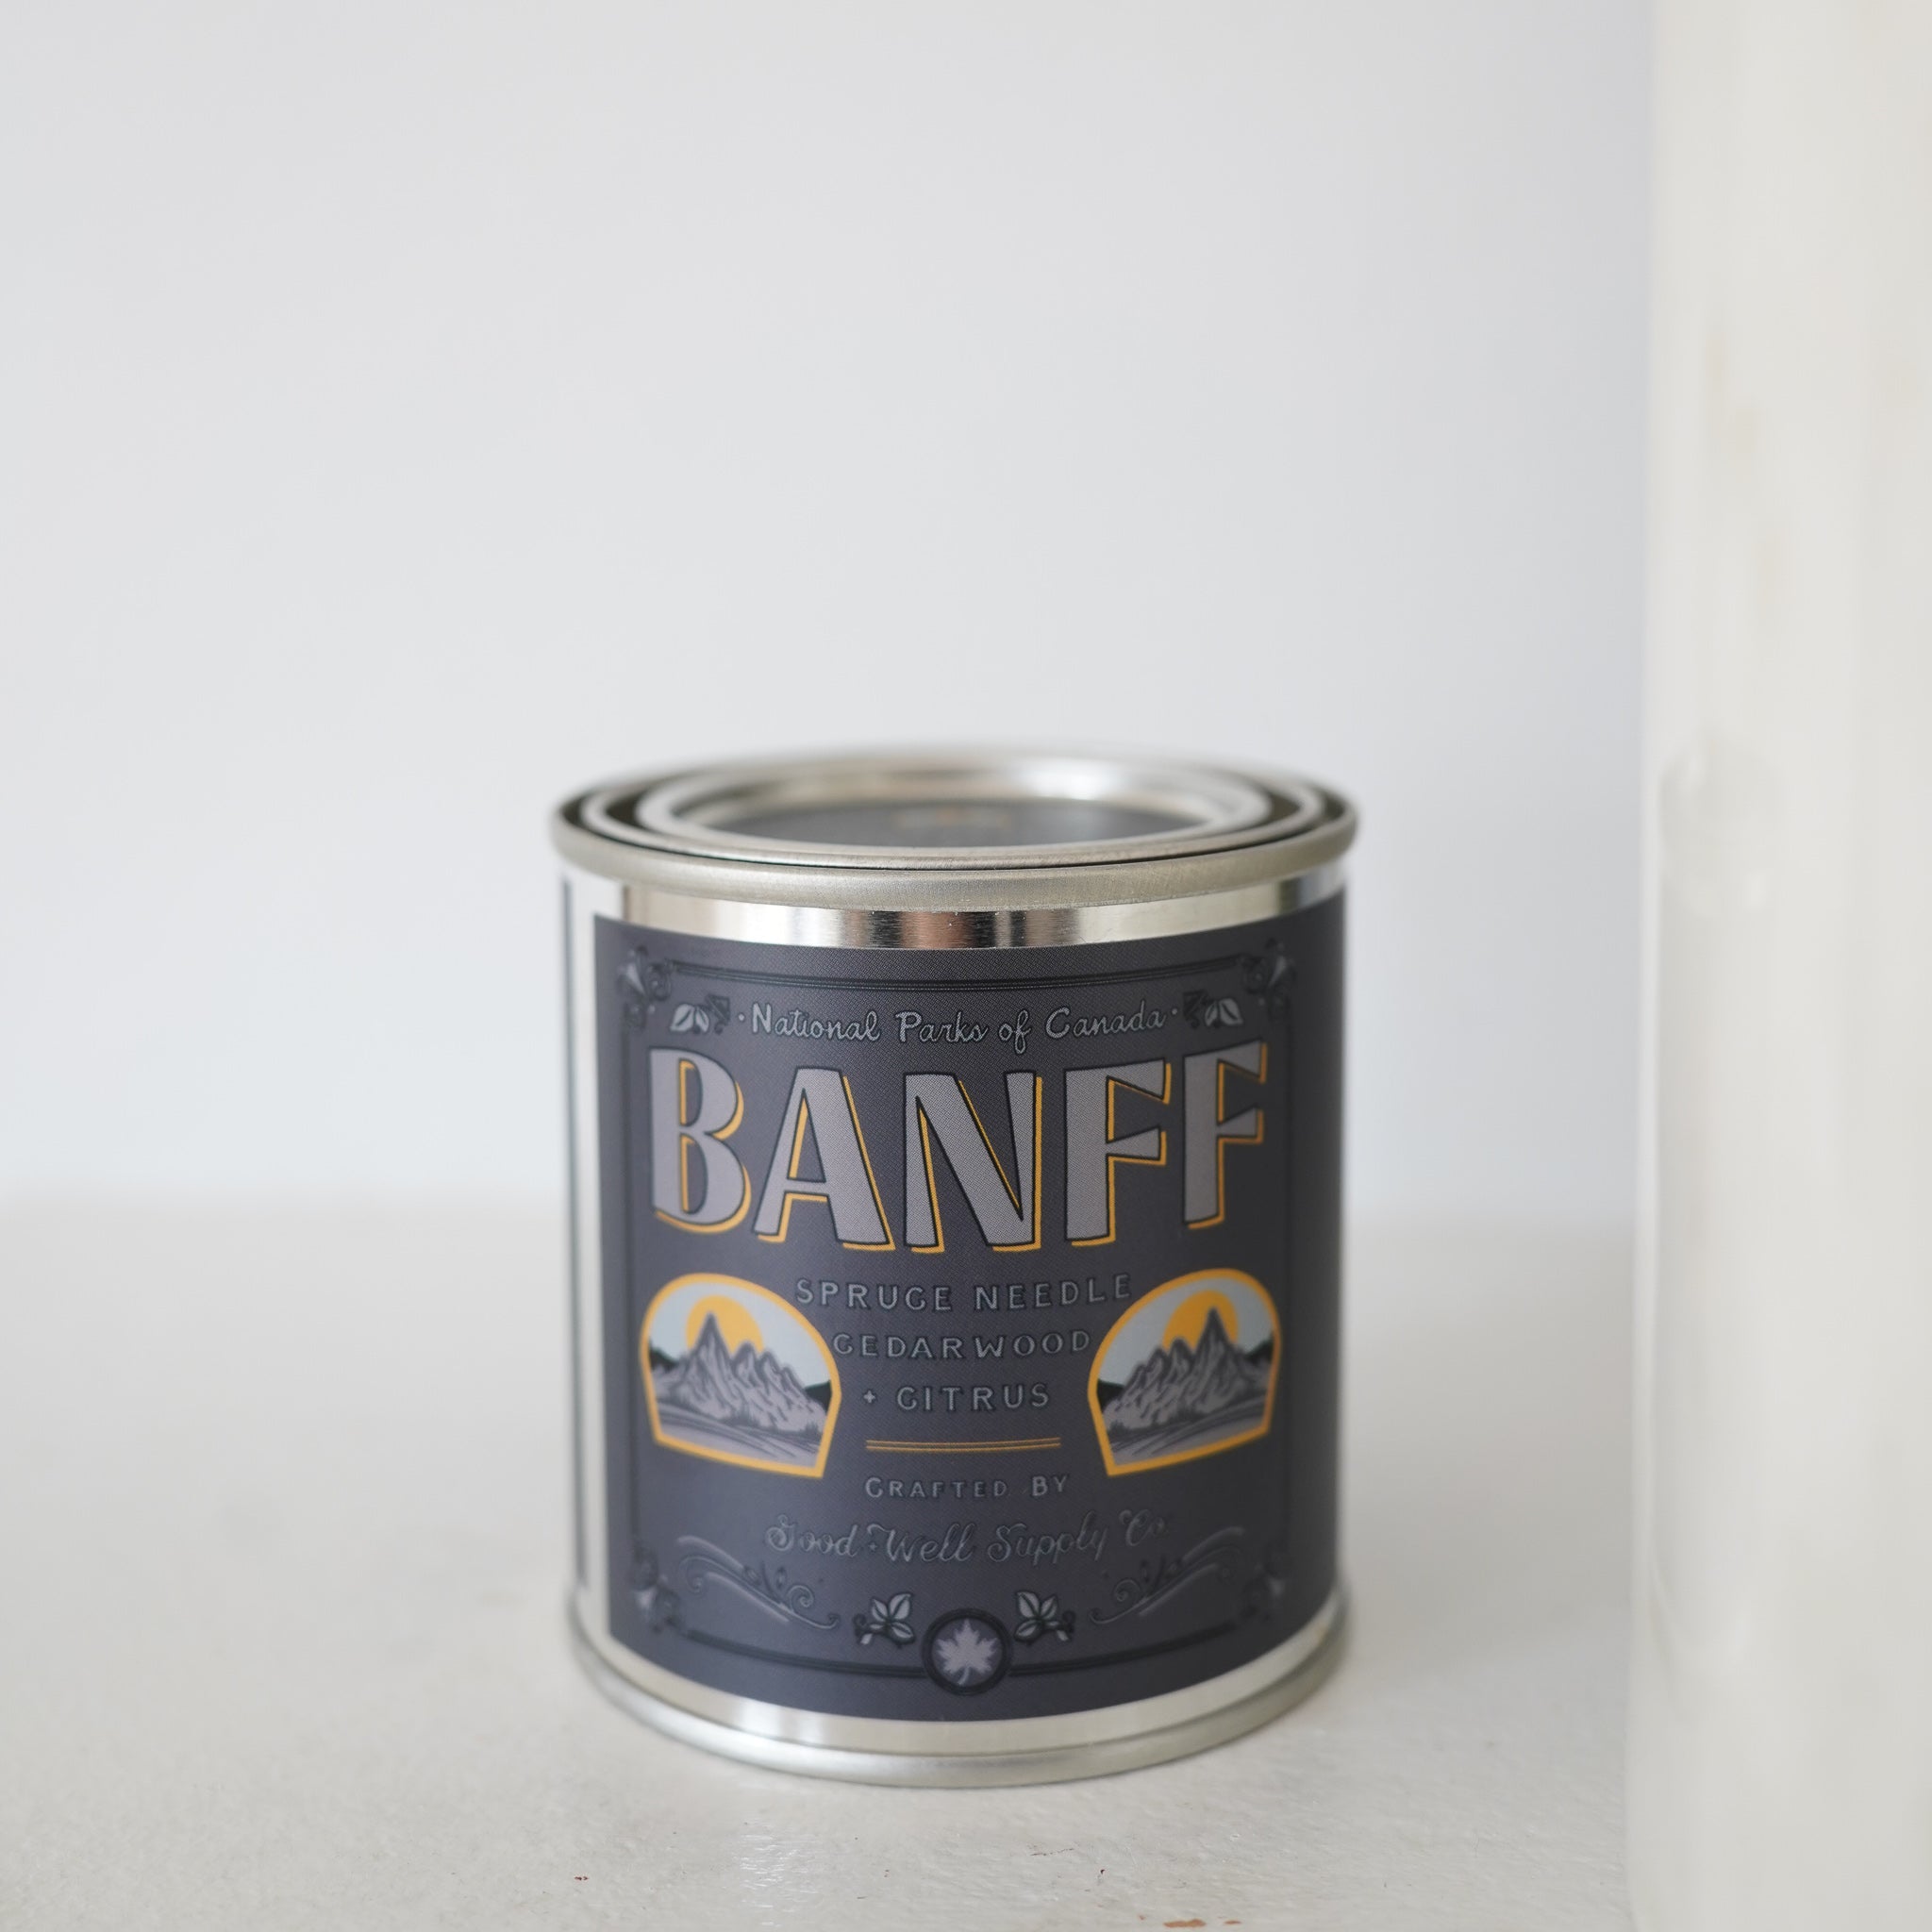 Banff National Park of Canada Candle